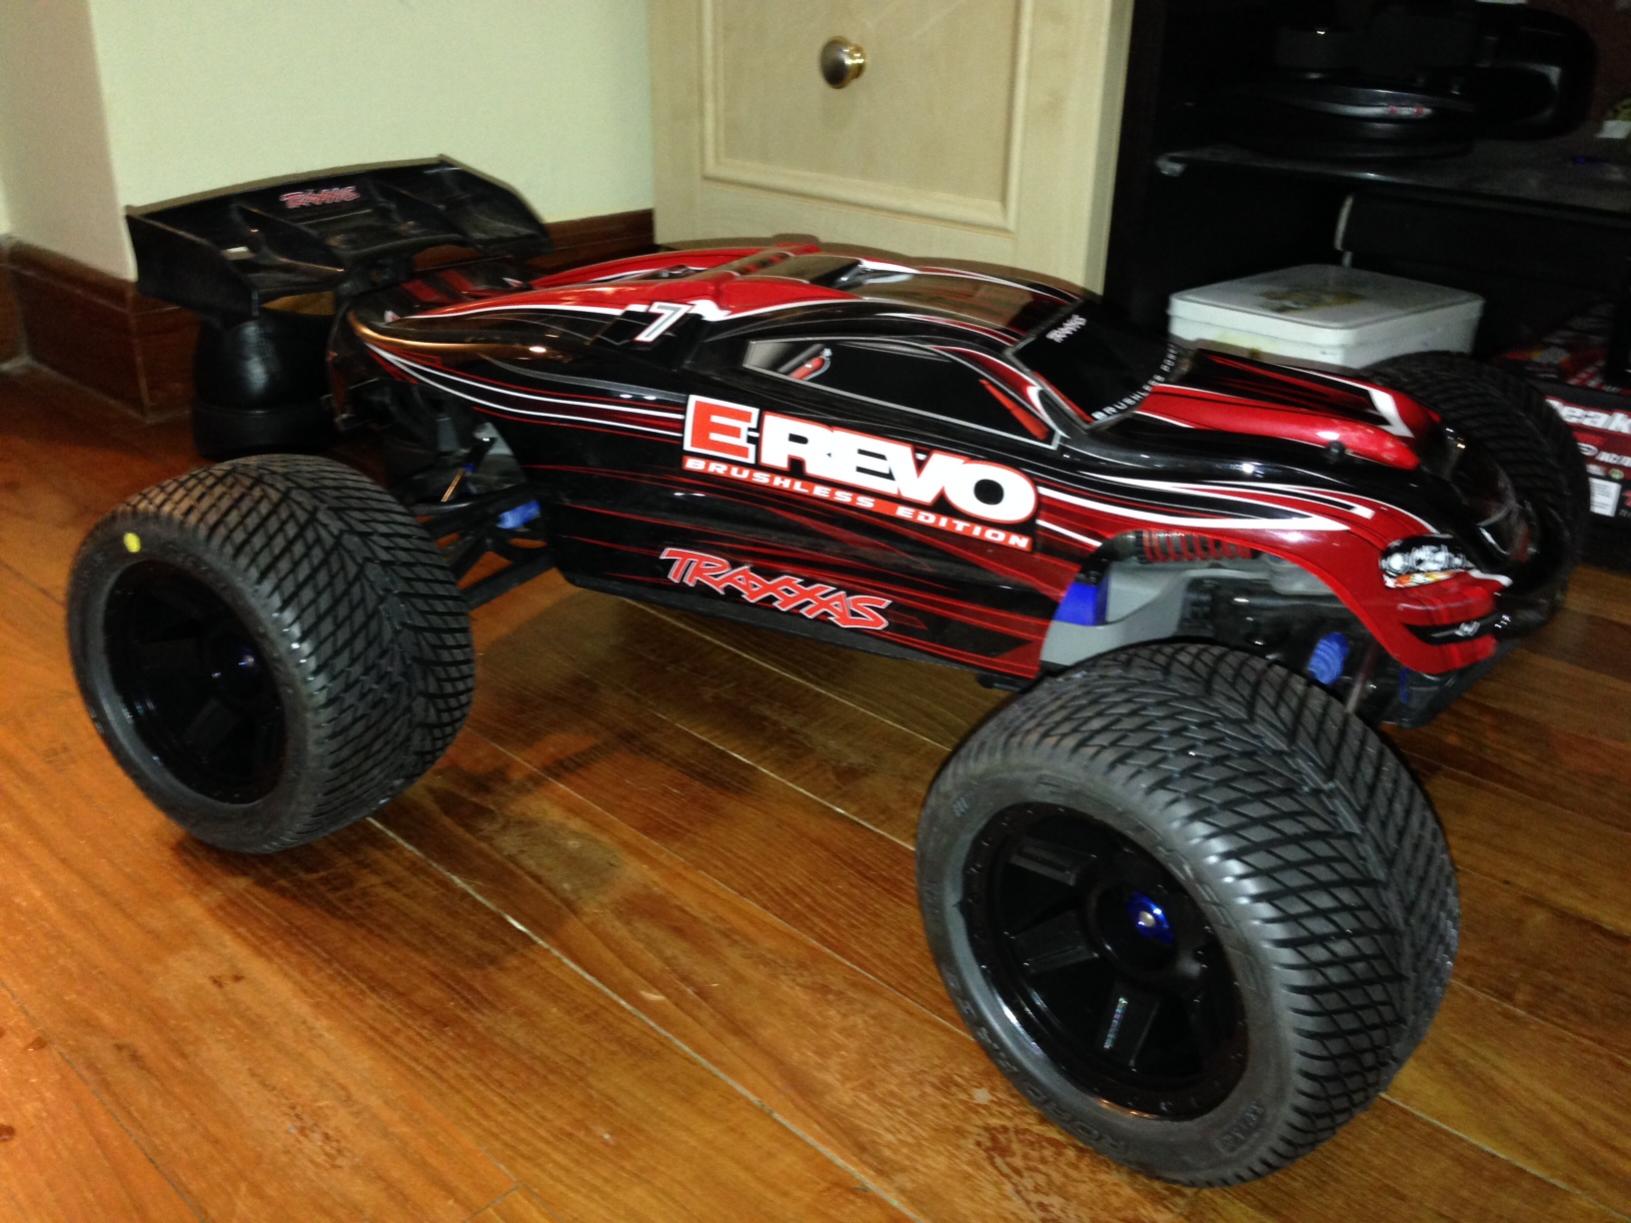 Traxxas E-Revo 1/10 Scale Brushless with Upgrades - R/C Tech Forums